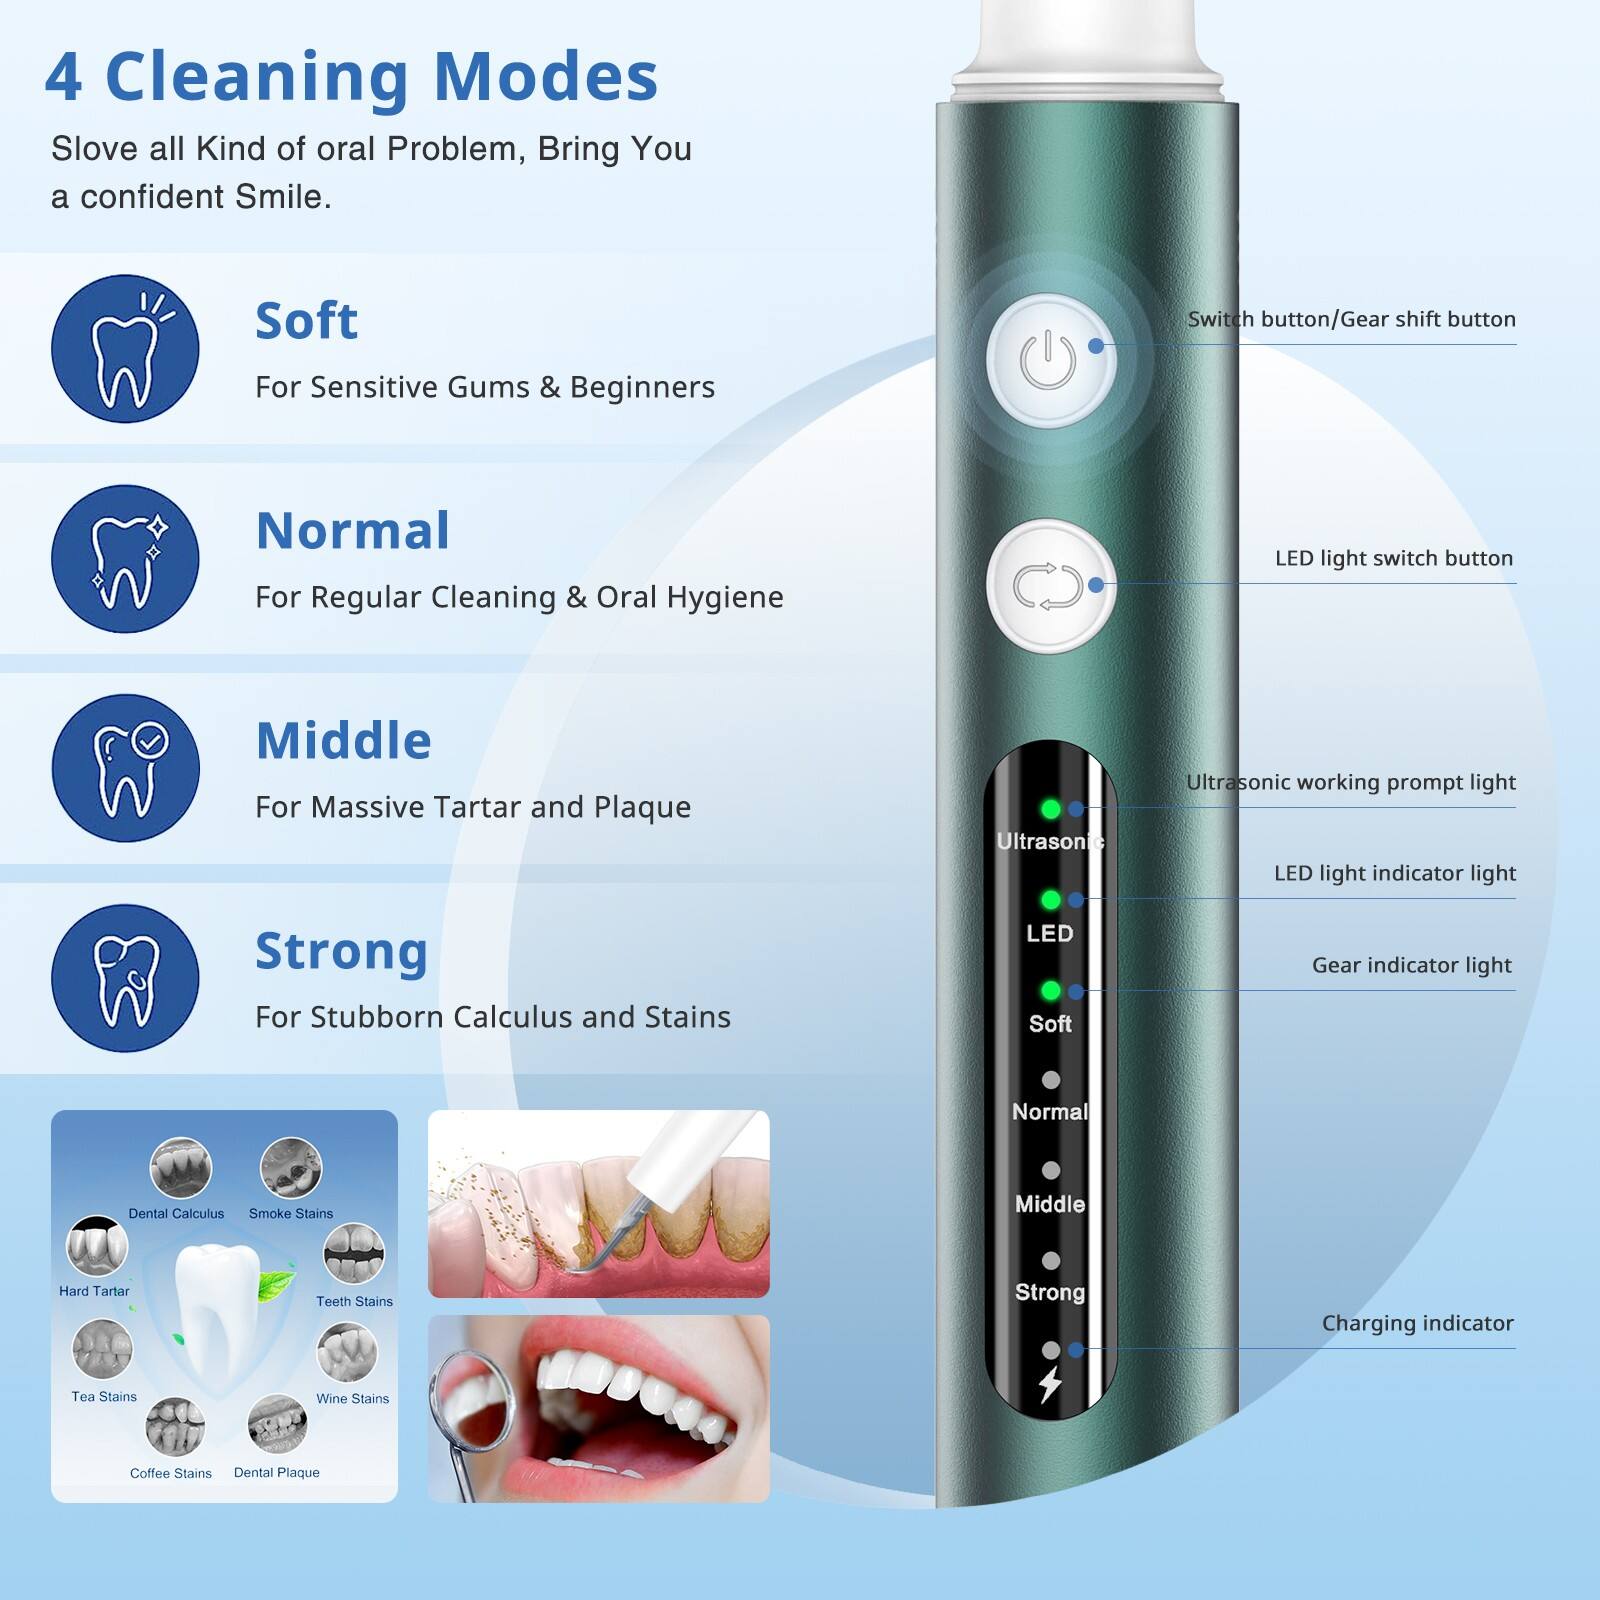 Ultrasonic Tooth Cleaner M191 Pro details